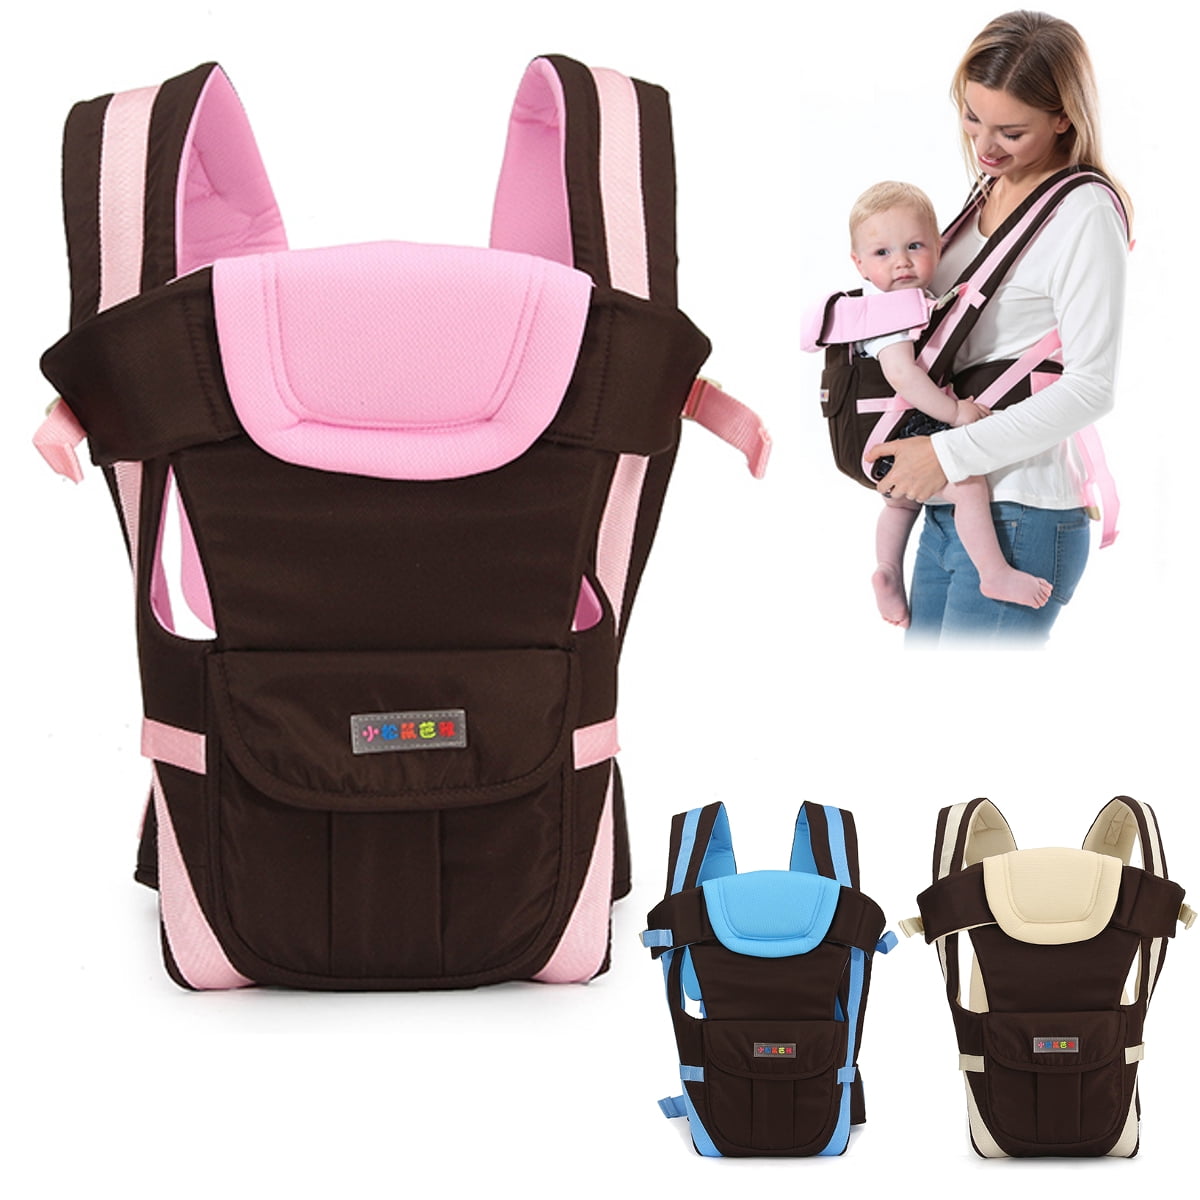 Infantino Cuddle Up Ergonomic Hoodie 2 Ways infant & Toddler Carrier Sling Pouch 